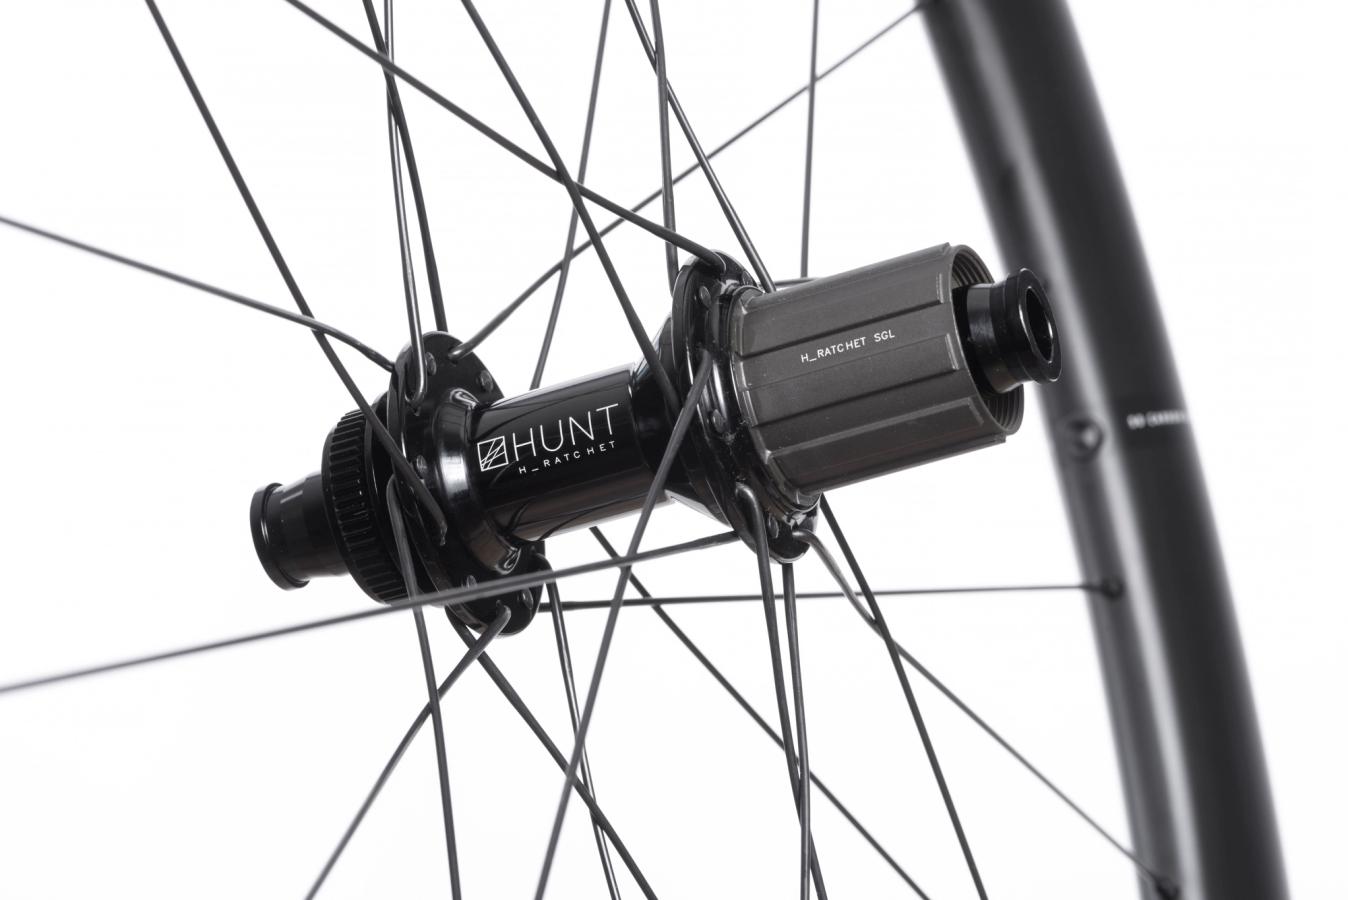 The new hubs have been designed around a 36 tooth ratchet design 